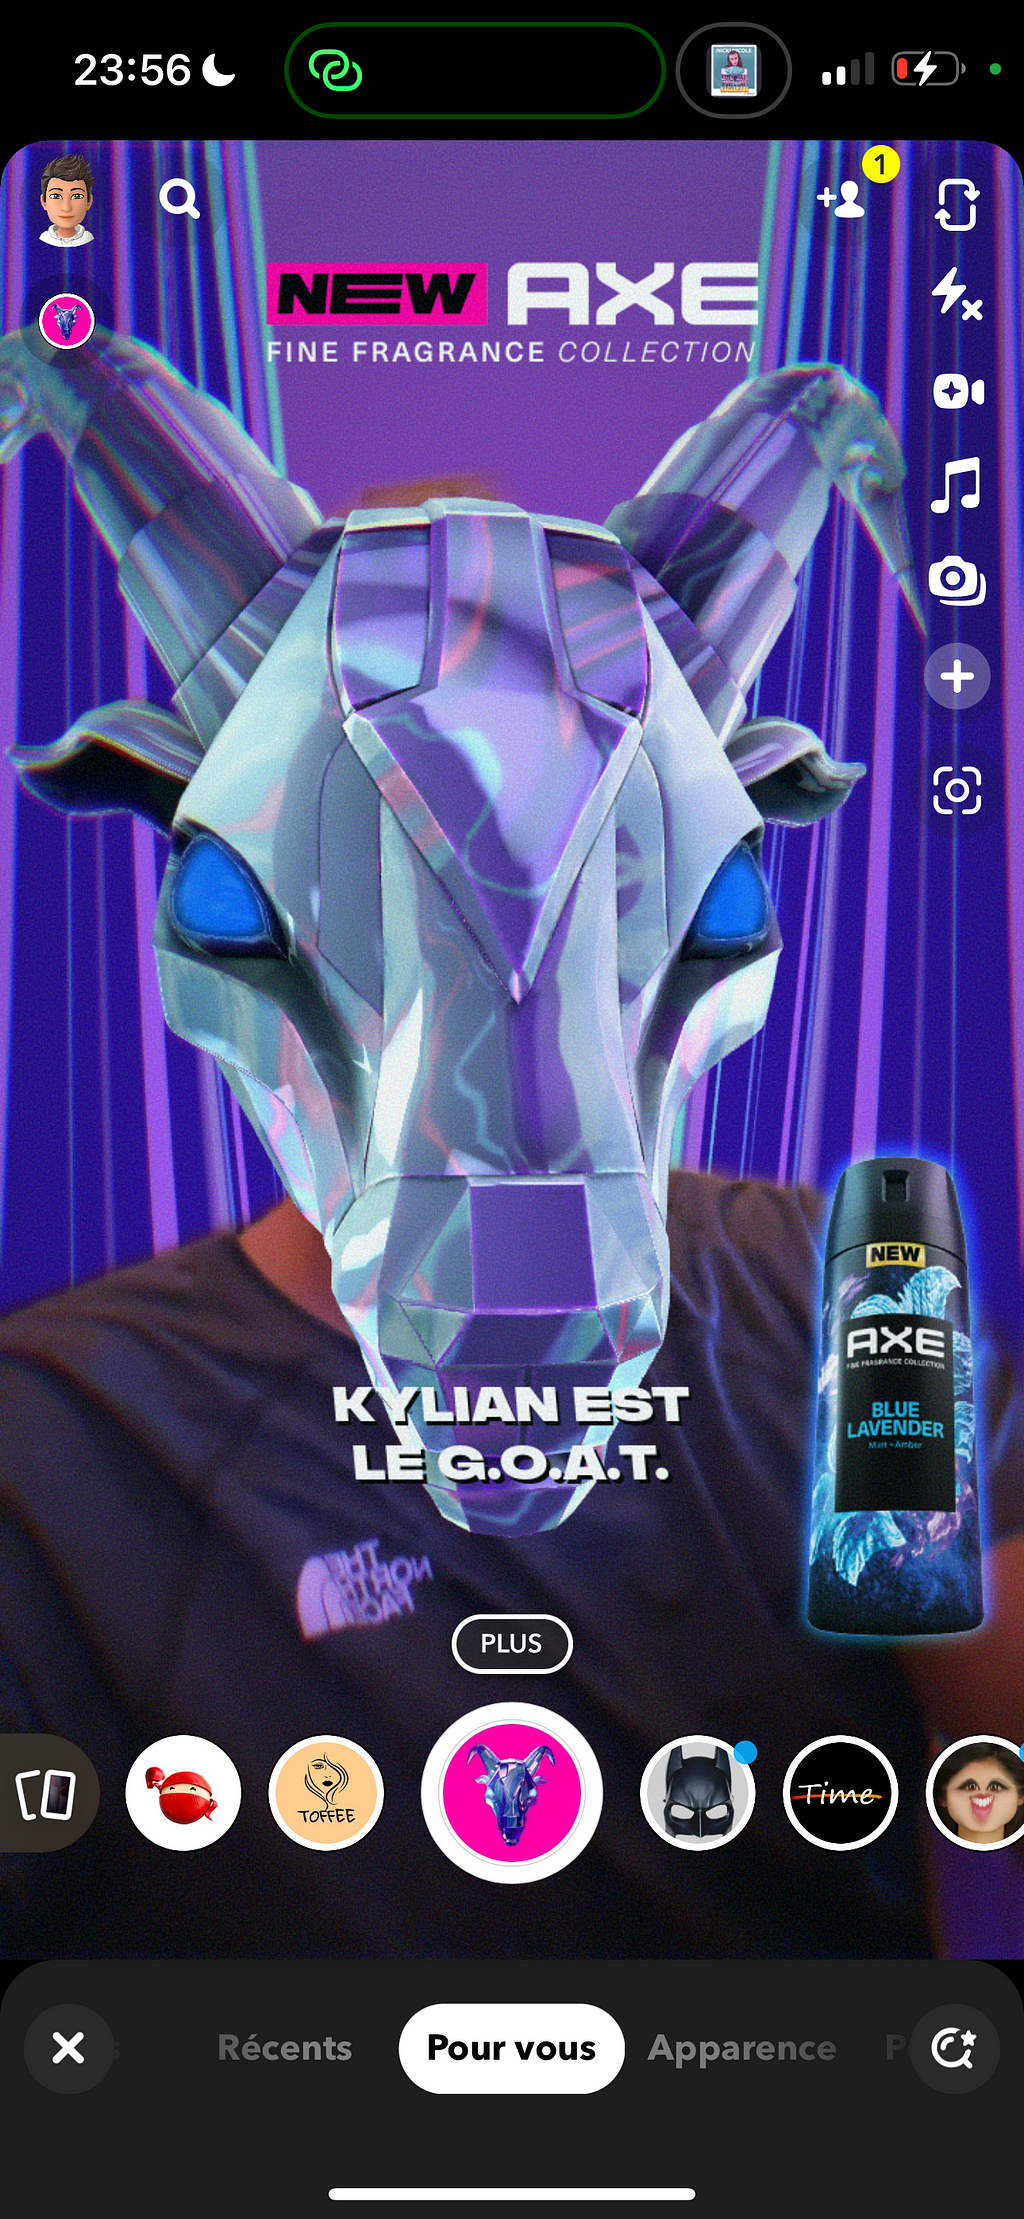 screenshot of a snapchat lens set up by the AXE brand demonstrating an augmented reality effect